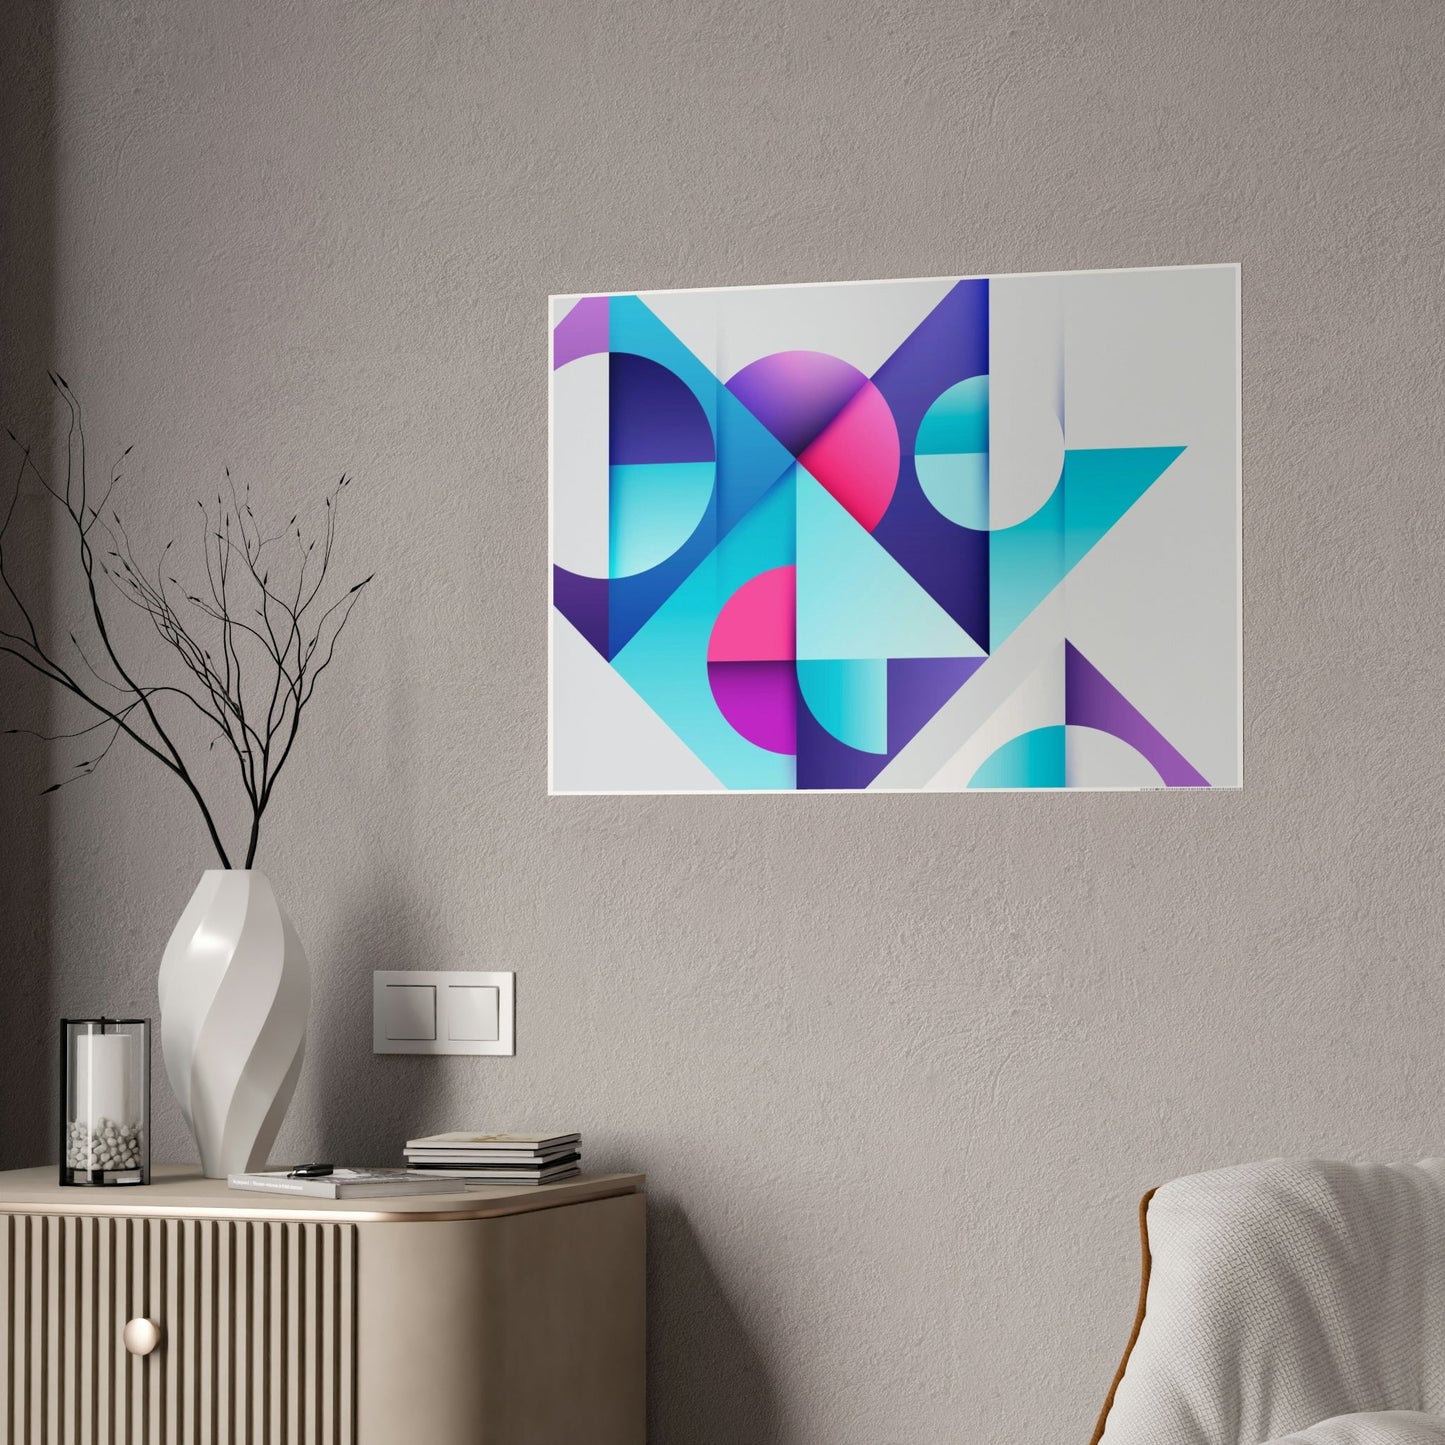 Geometric Shapes on Canvas: Contemporary Wall Art to Inspire